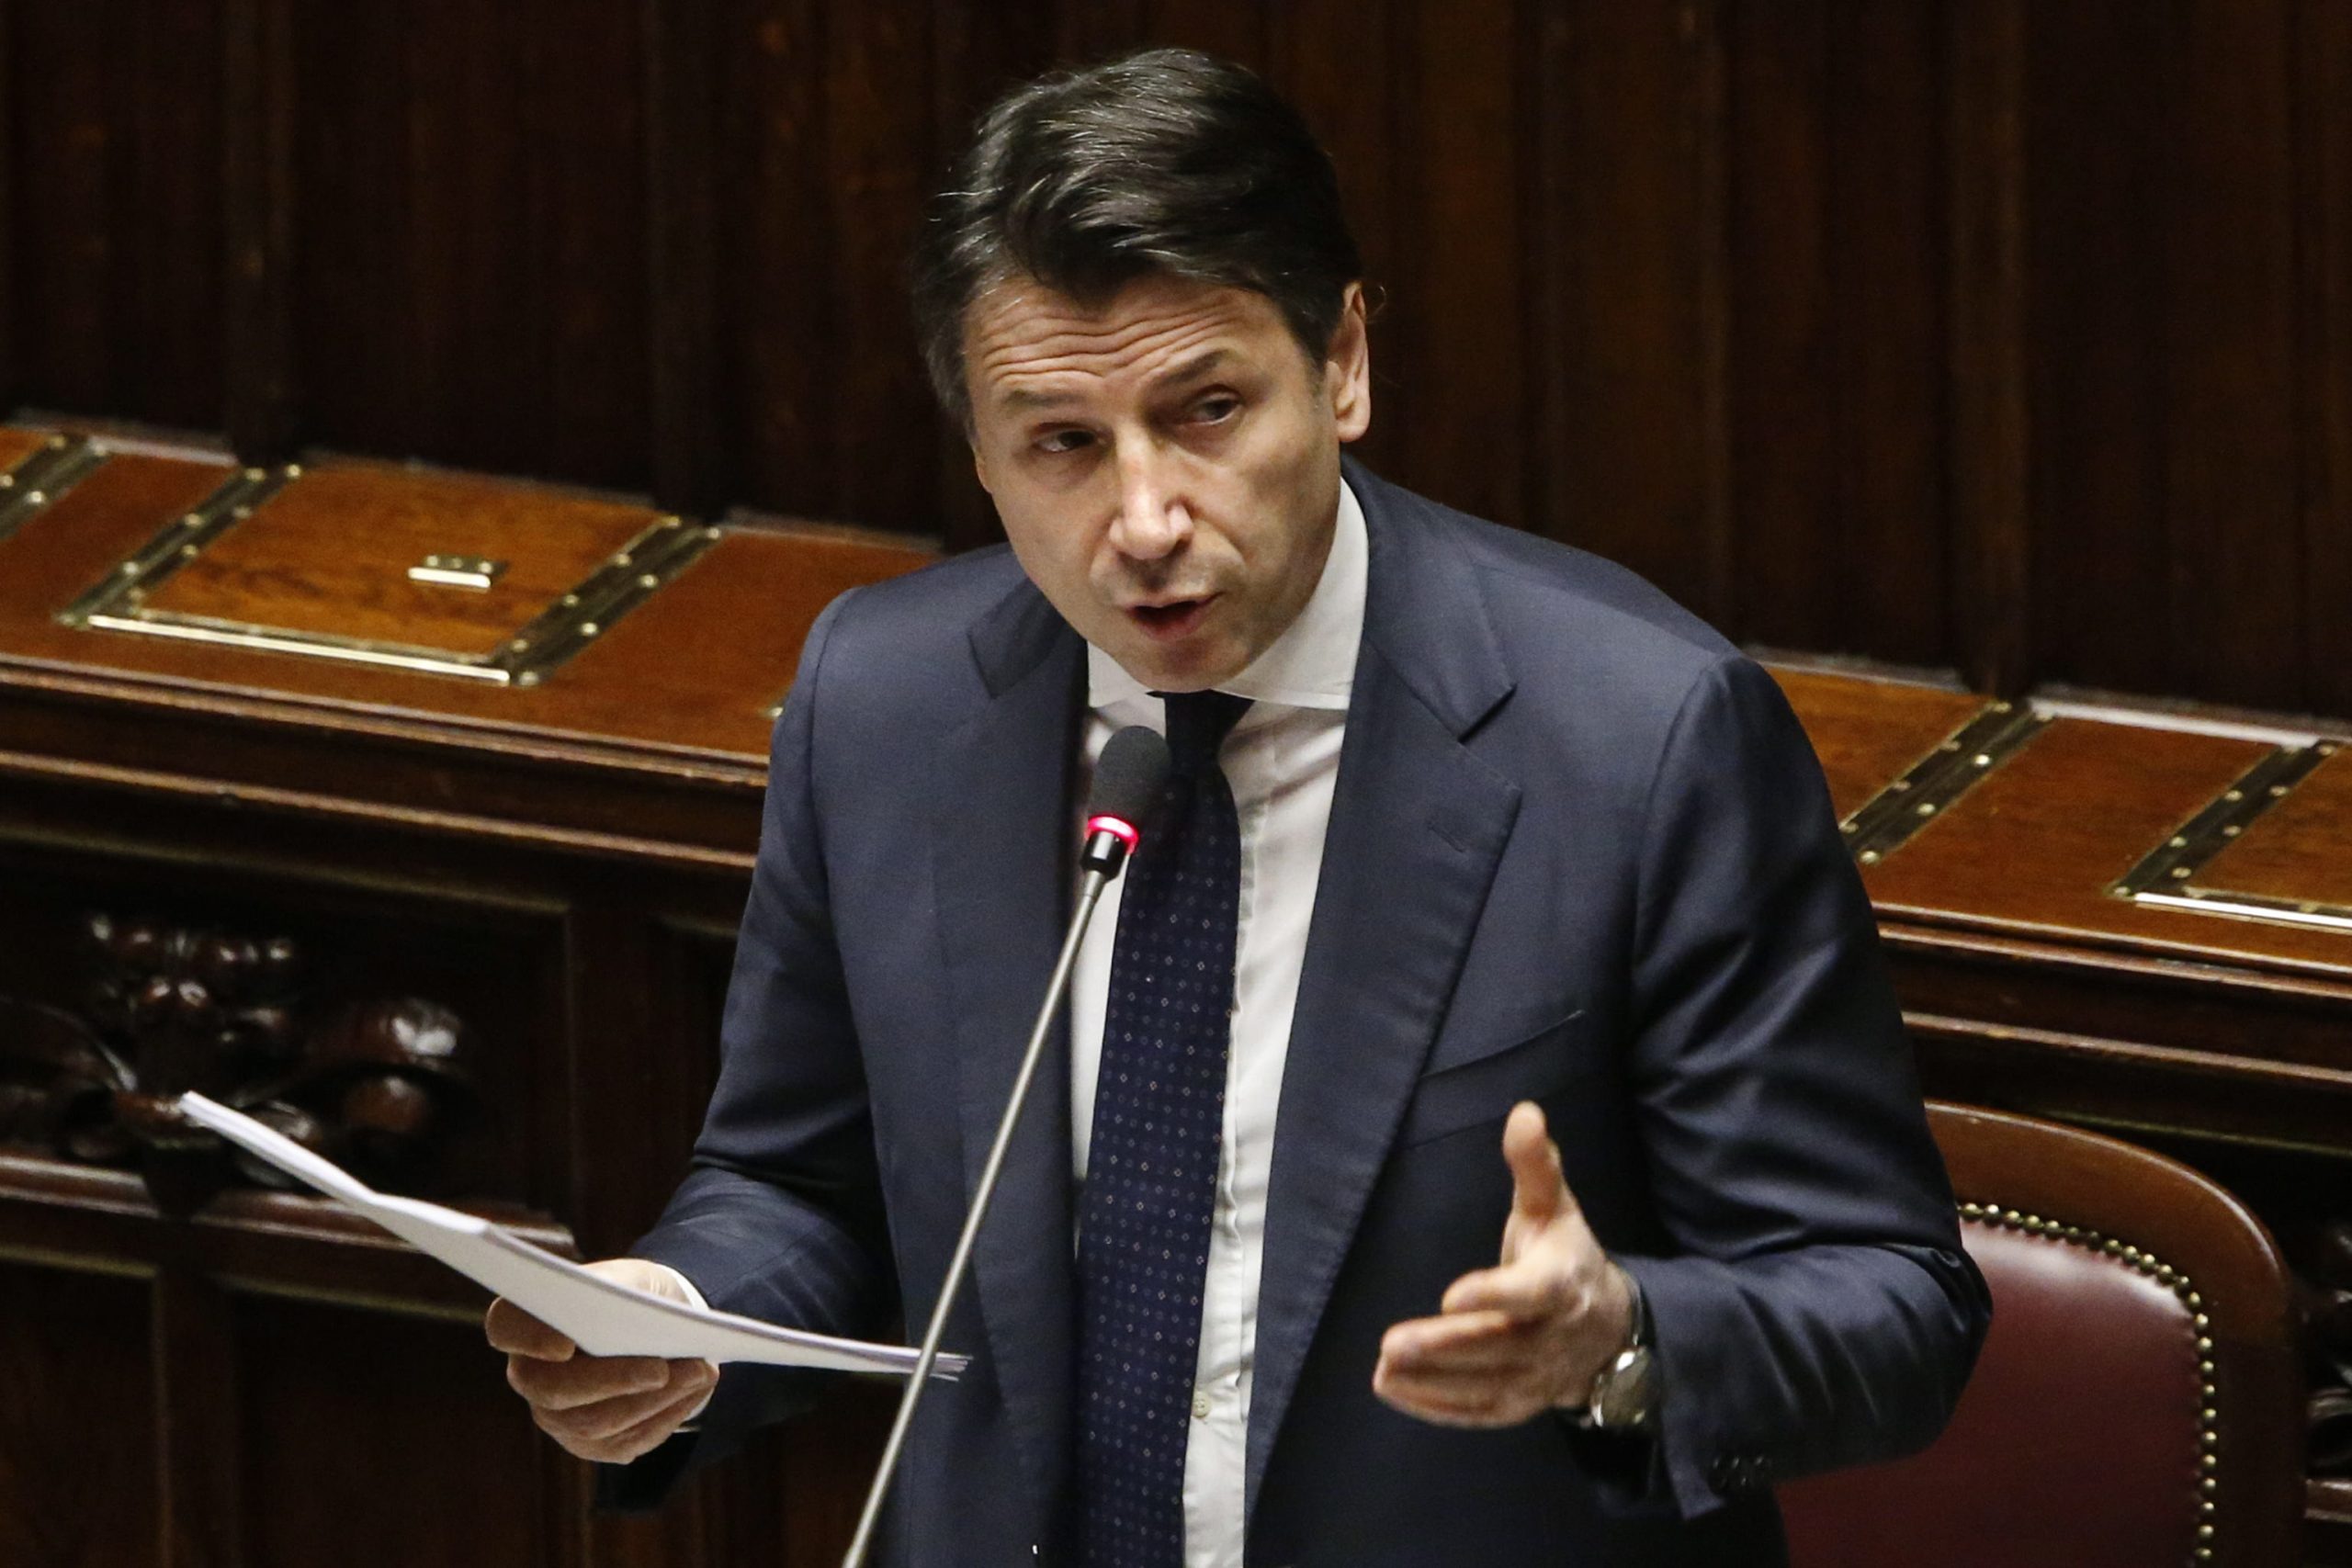 epa08322294 Italian Prime Minister, Giuseppe Conte, reports to the Parliament about the measures taken to counter the spread of the Coronavirus in Italy, Rome, Italy, 25 March 2020.  EPA/FABIO FRUSTACI